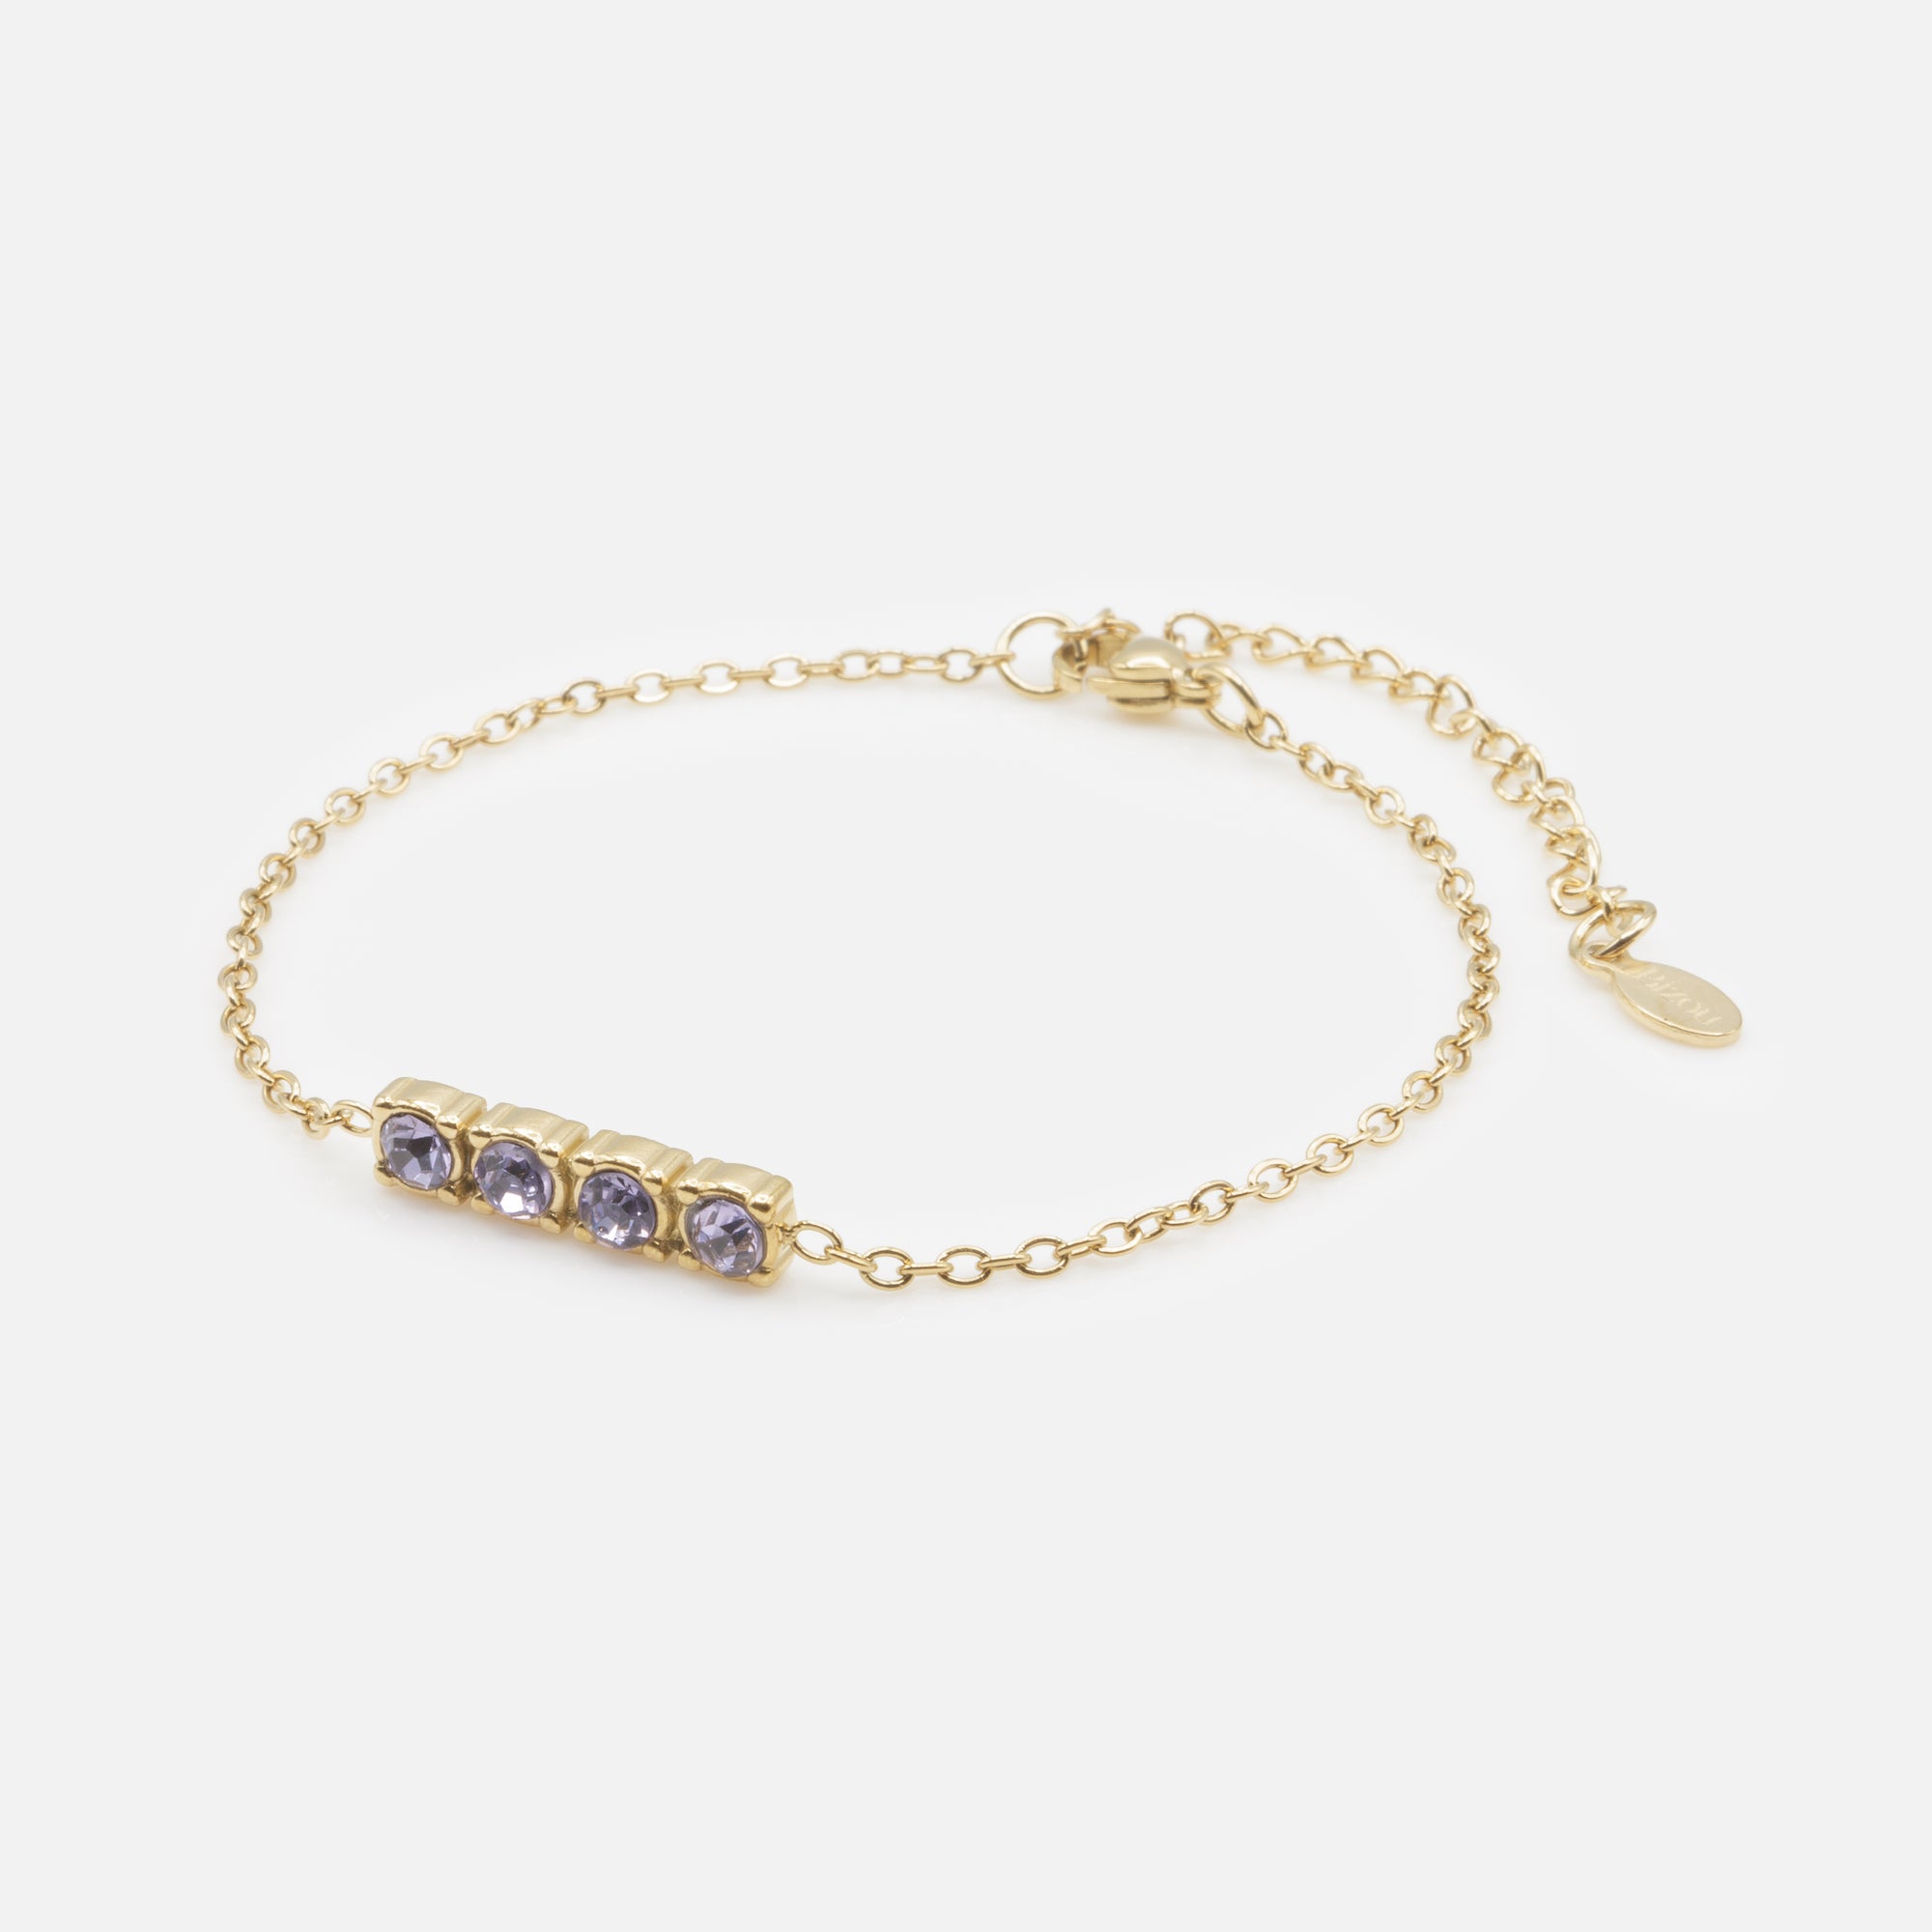 Golden bracelet and its quartet of purple cubic zirconia in stainless steel